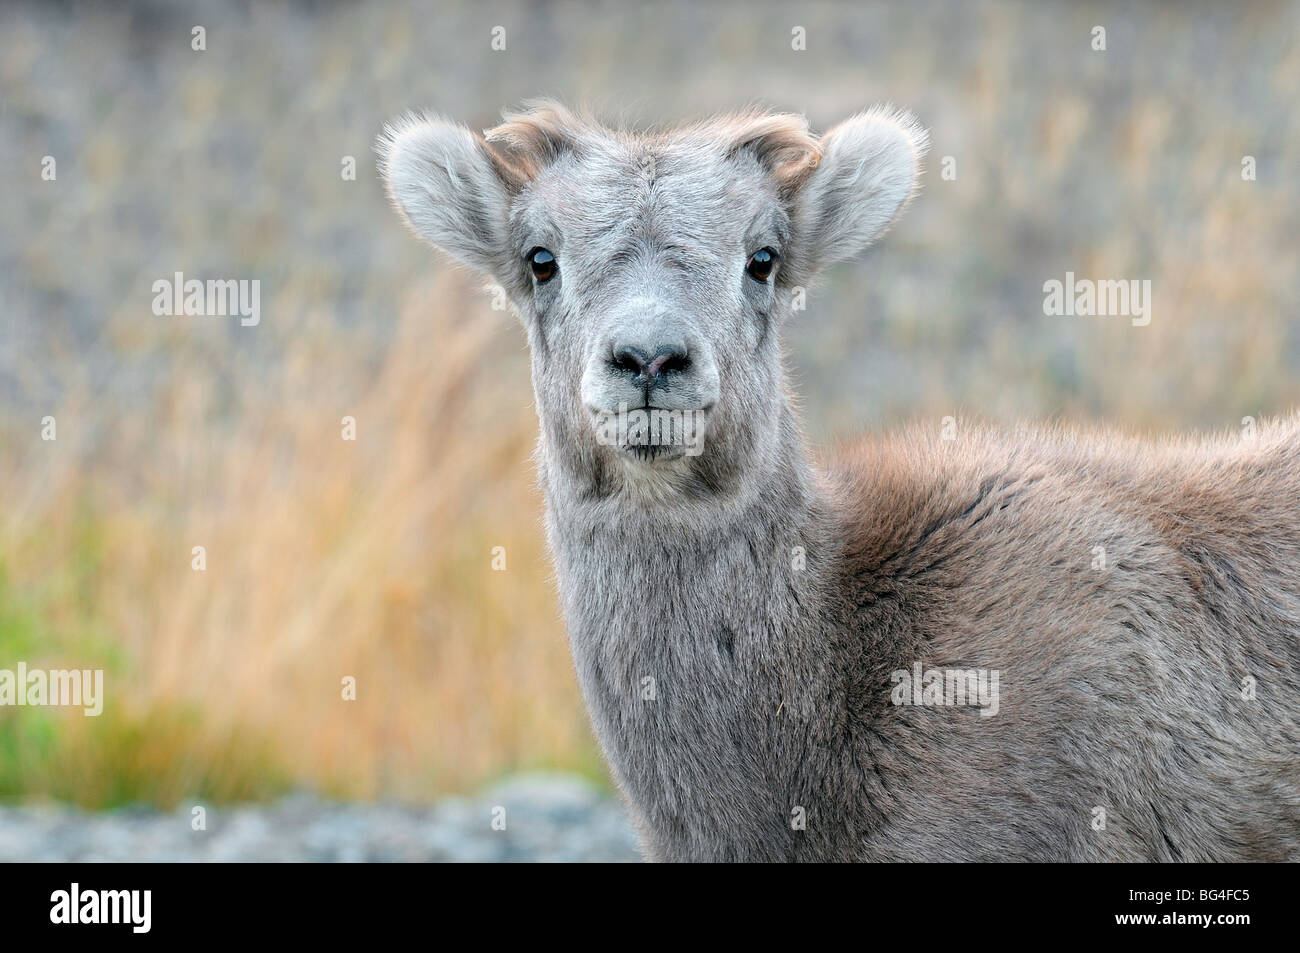 A portrait image of a young Rocky Mountain Bighorn Sheep Stock Photo